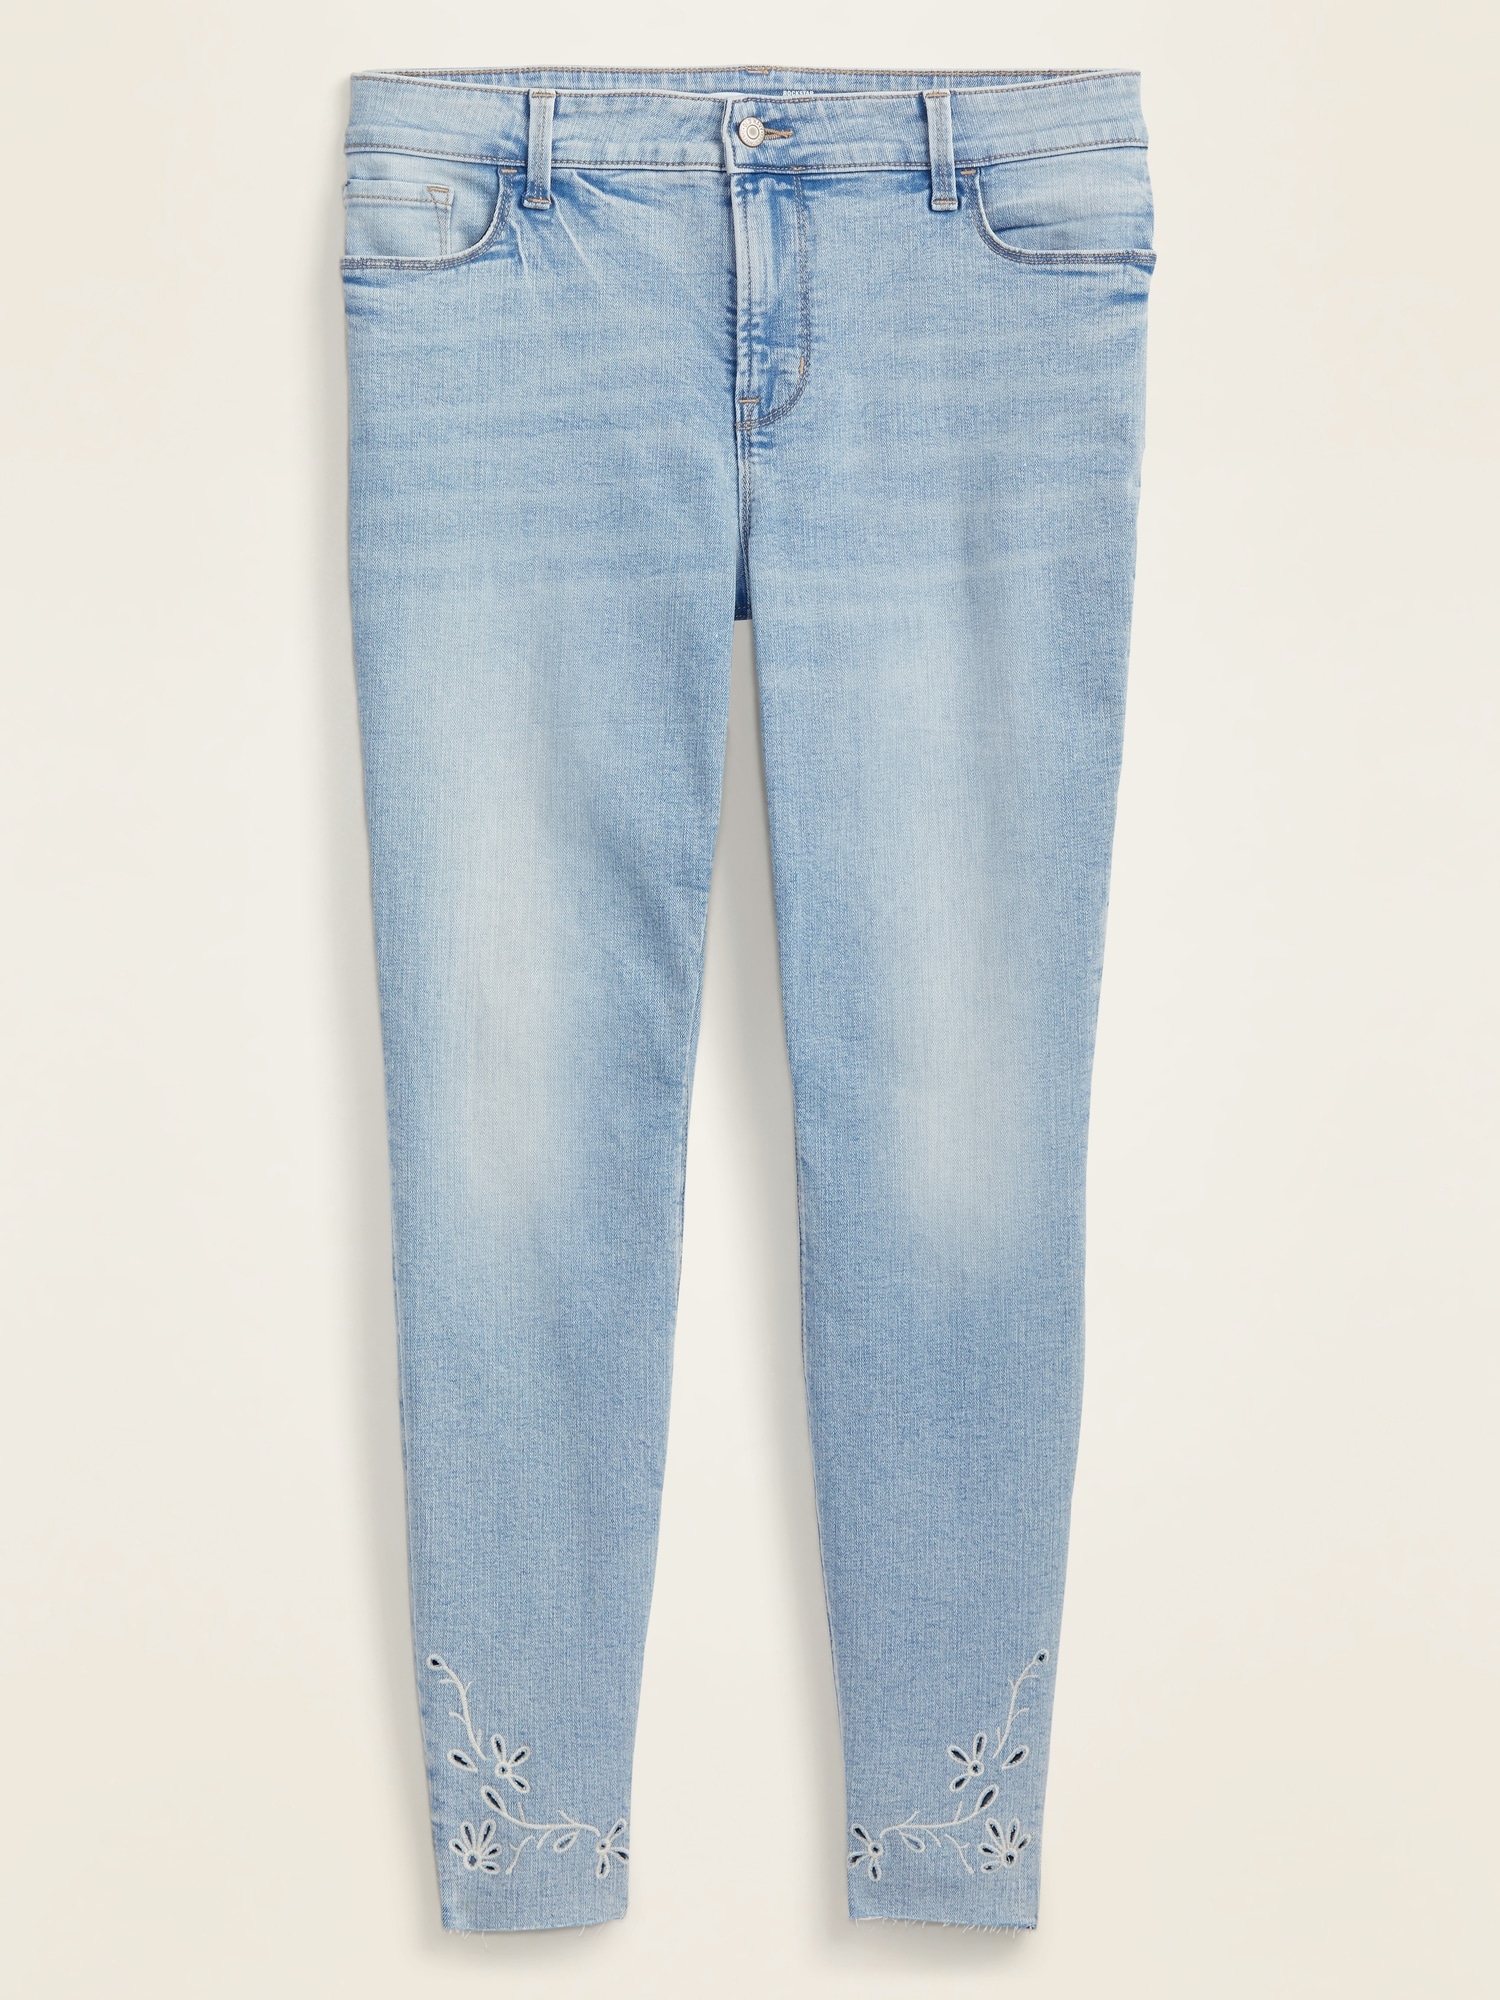 old navy embroidered jeans